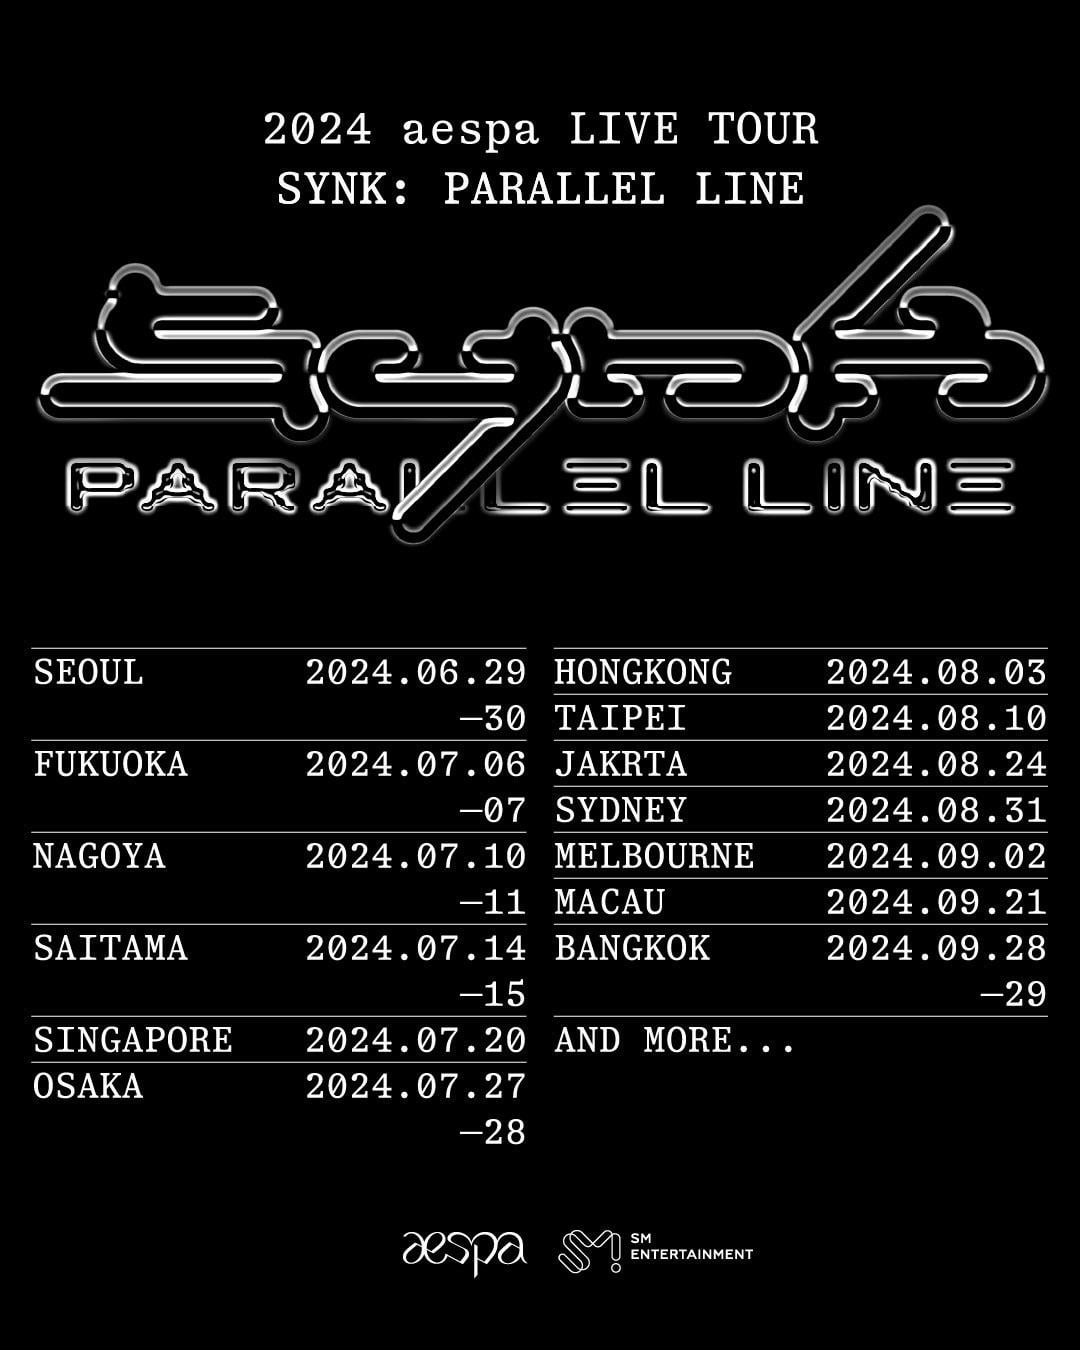 240219 aespa announces their new live tour, "SYNK: PARALLEL LINE"